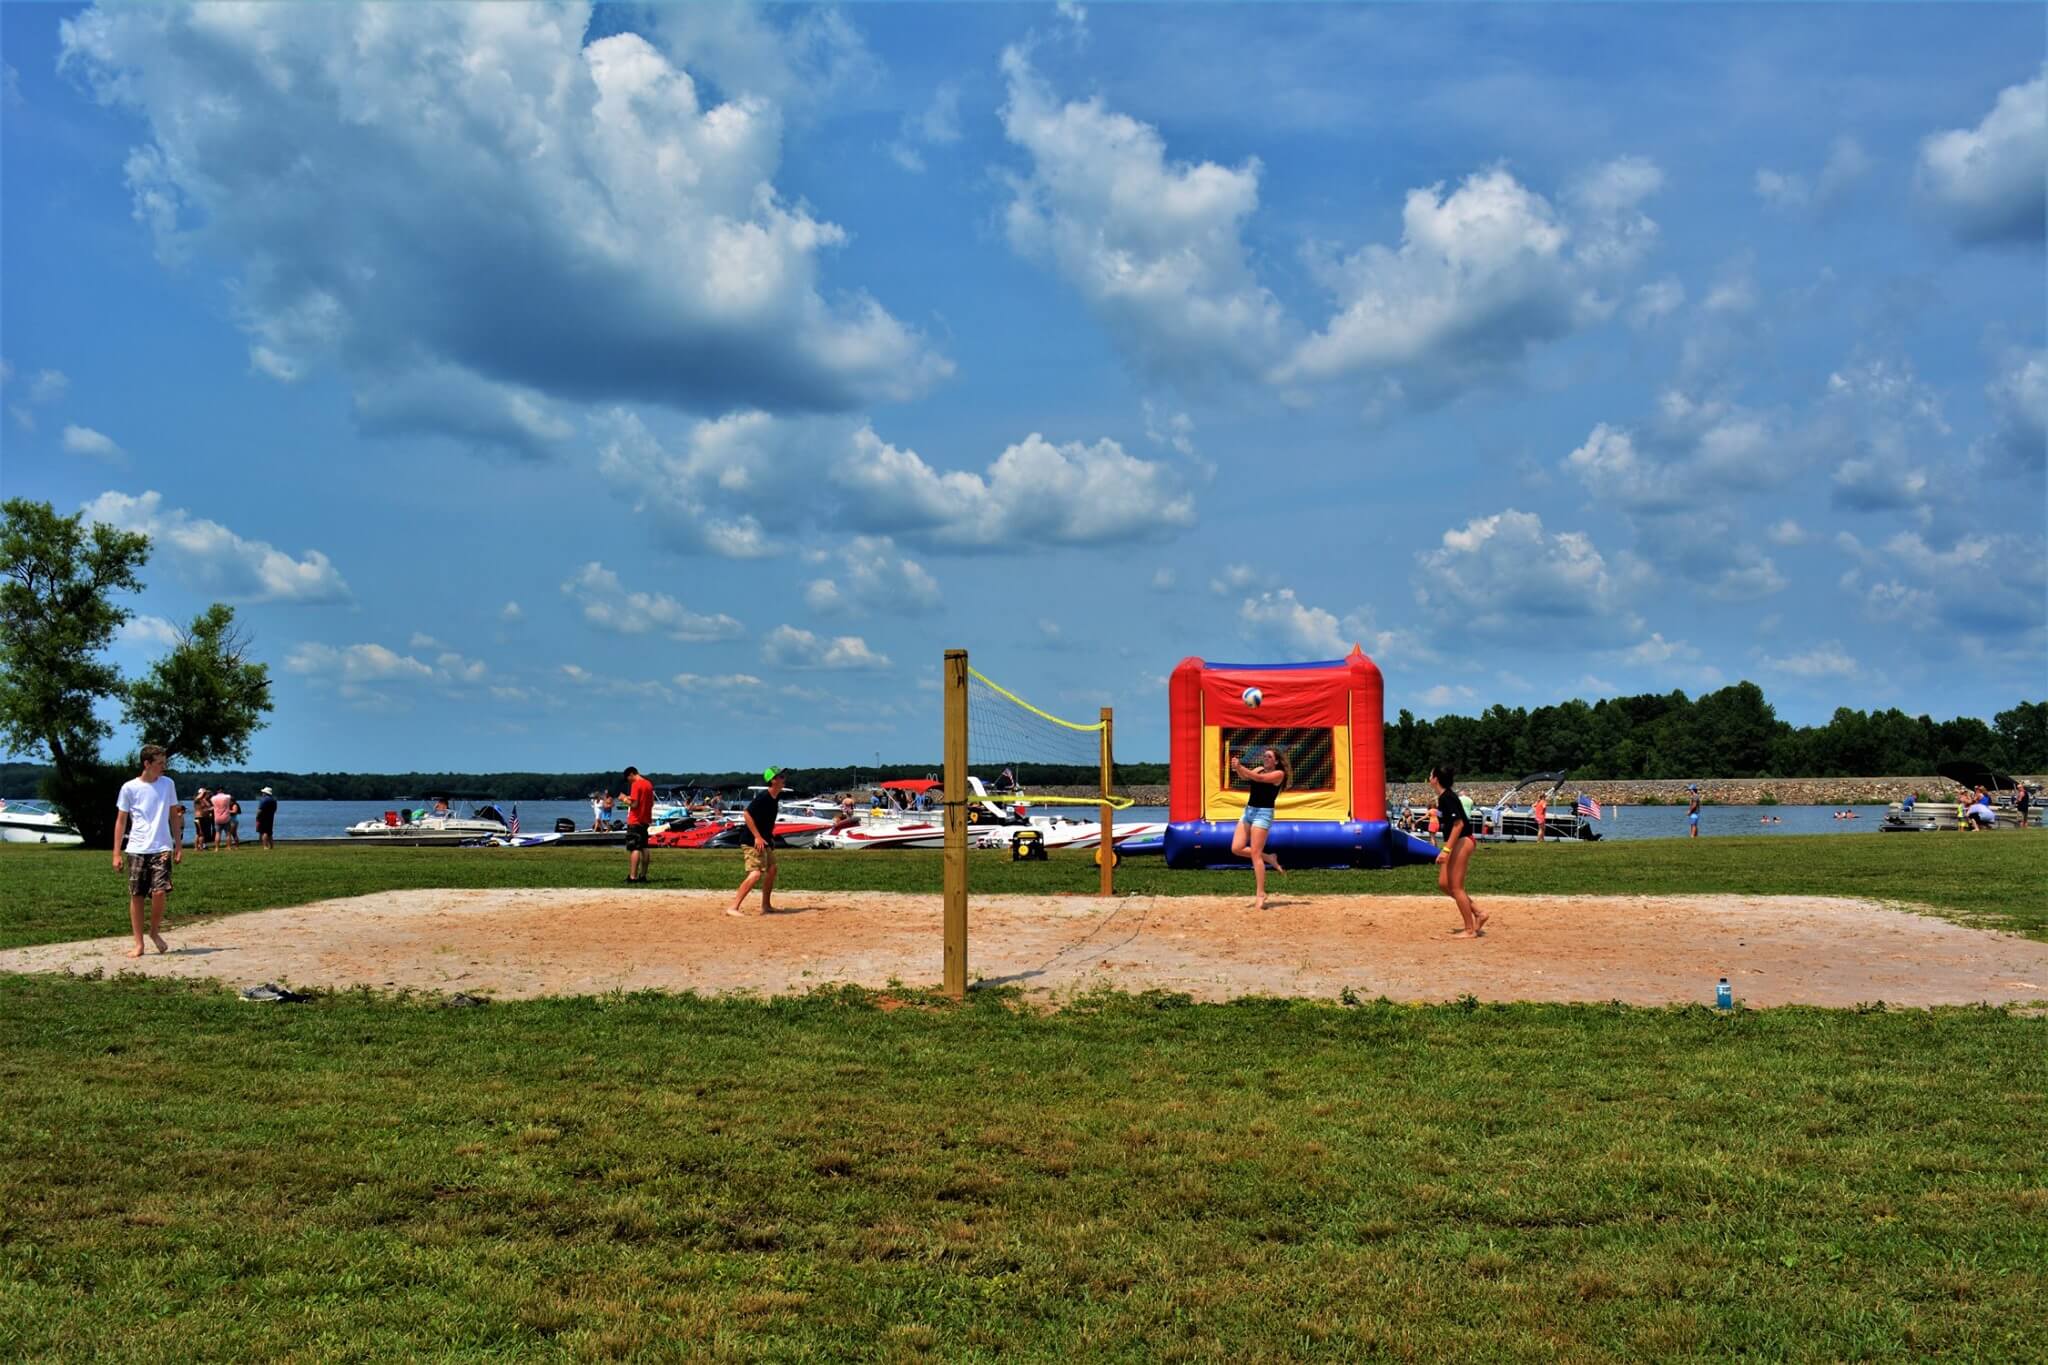 A red, yellow and blue bouncy house in the middle of an open field.